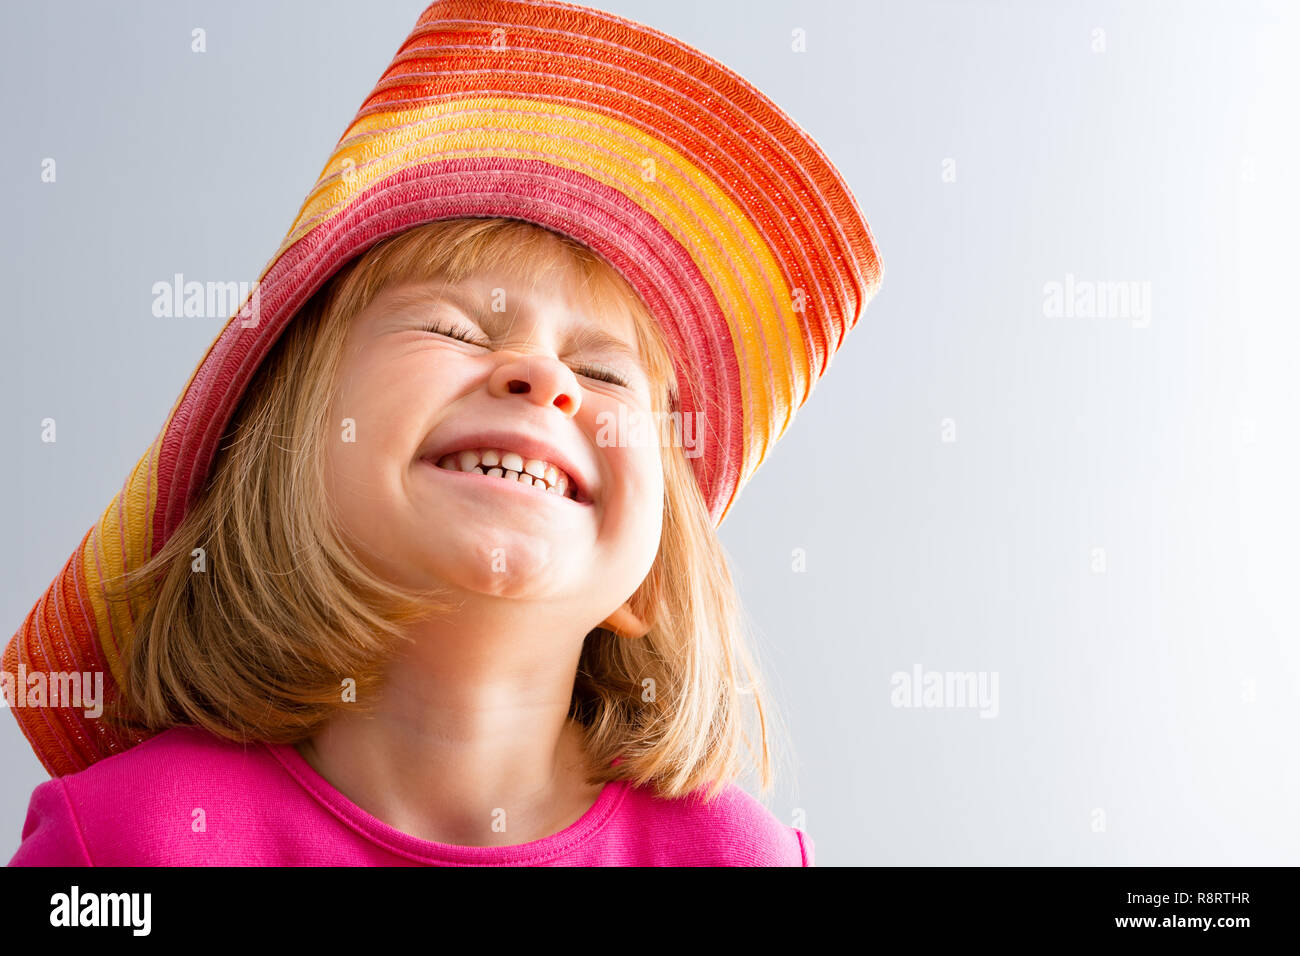 Young girl in colorful hat squinting her face, burst in laughing or crying, bust portrait from low angle, against white background with copy space Stock Photo